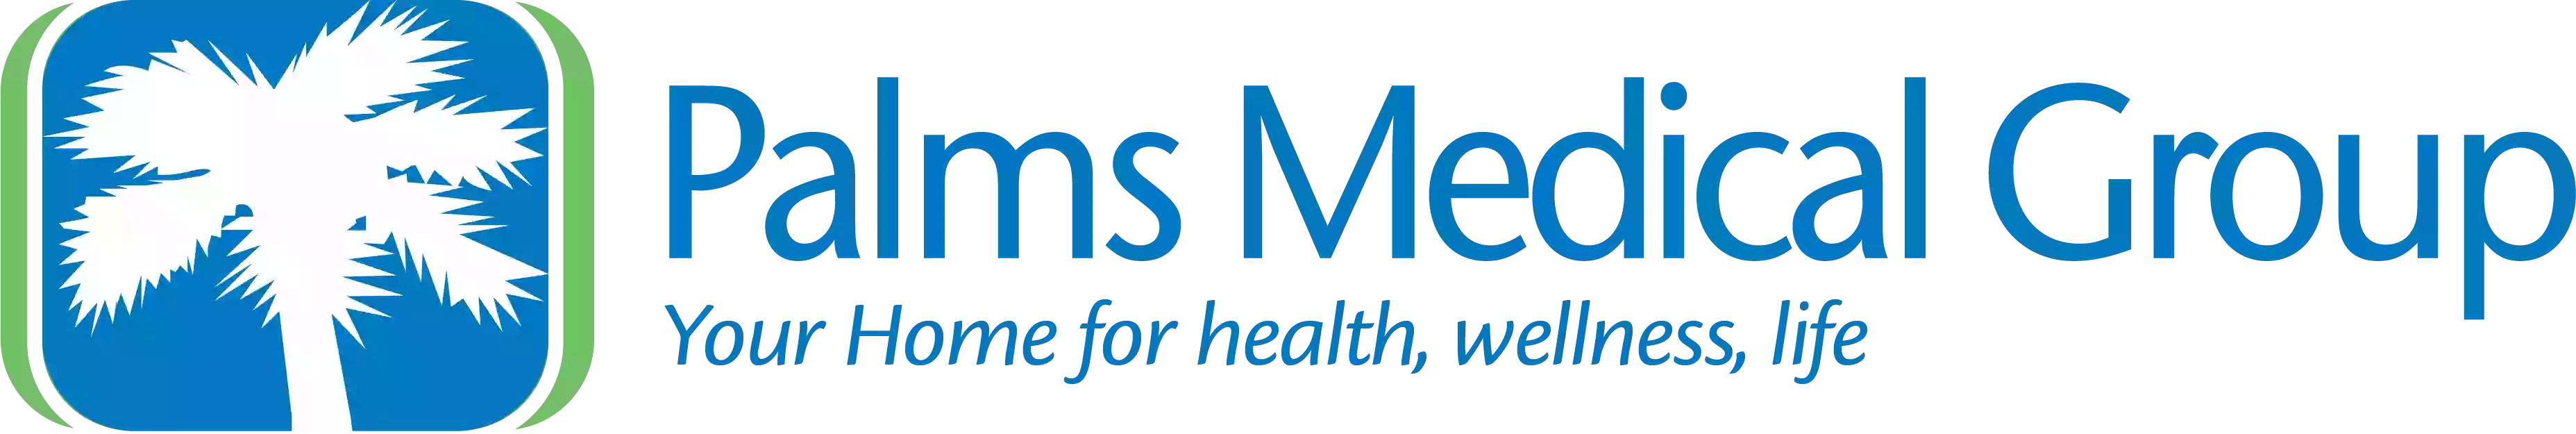 Palms Medical Group - Bell